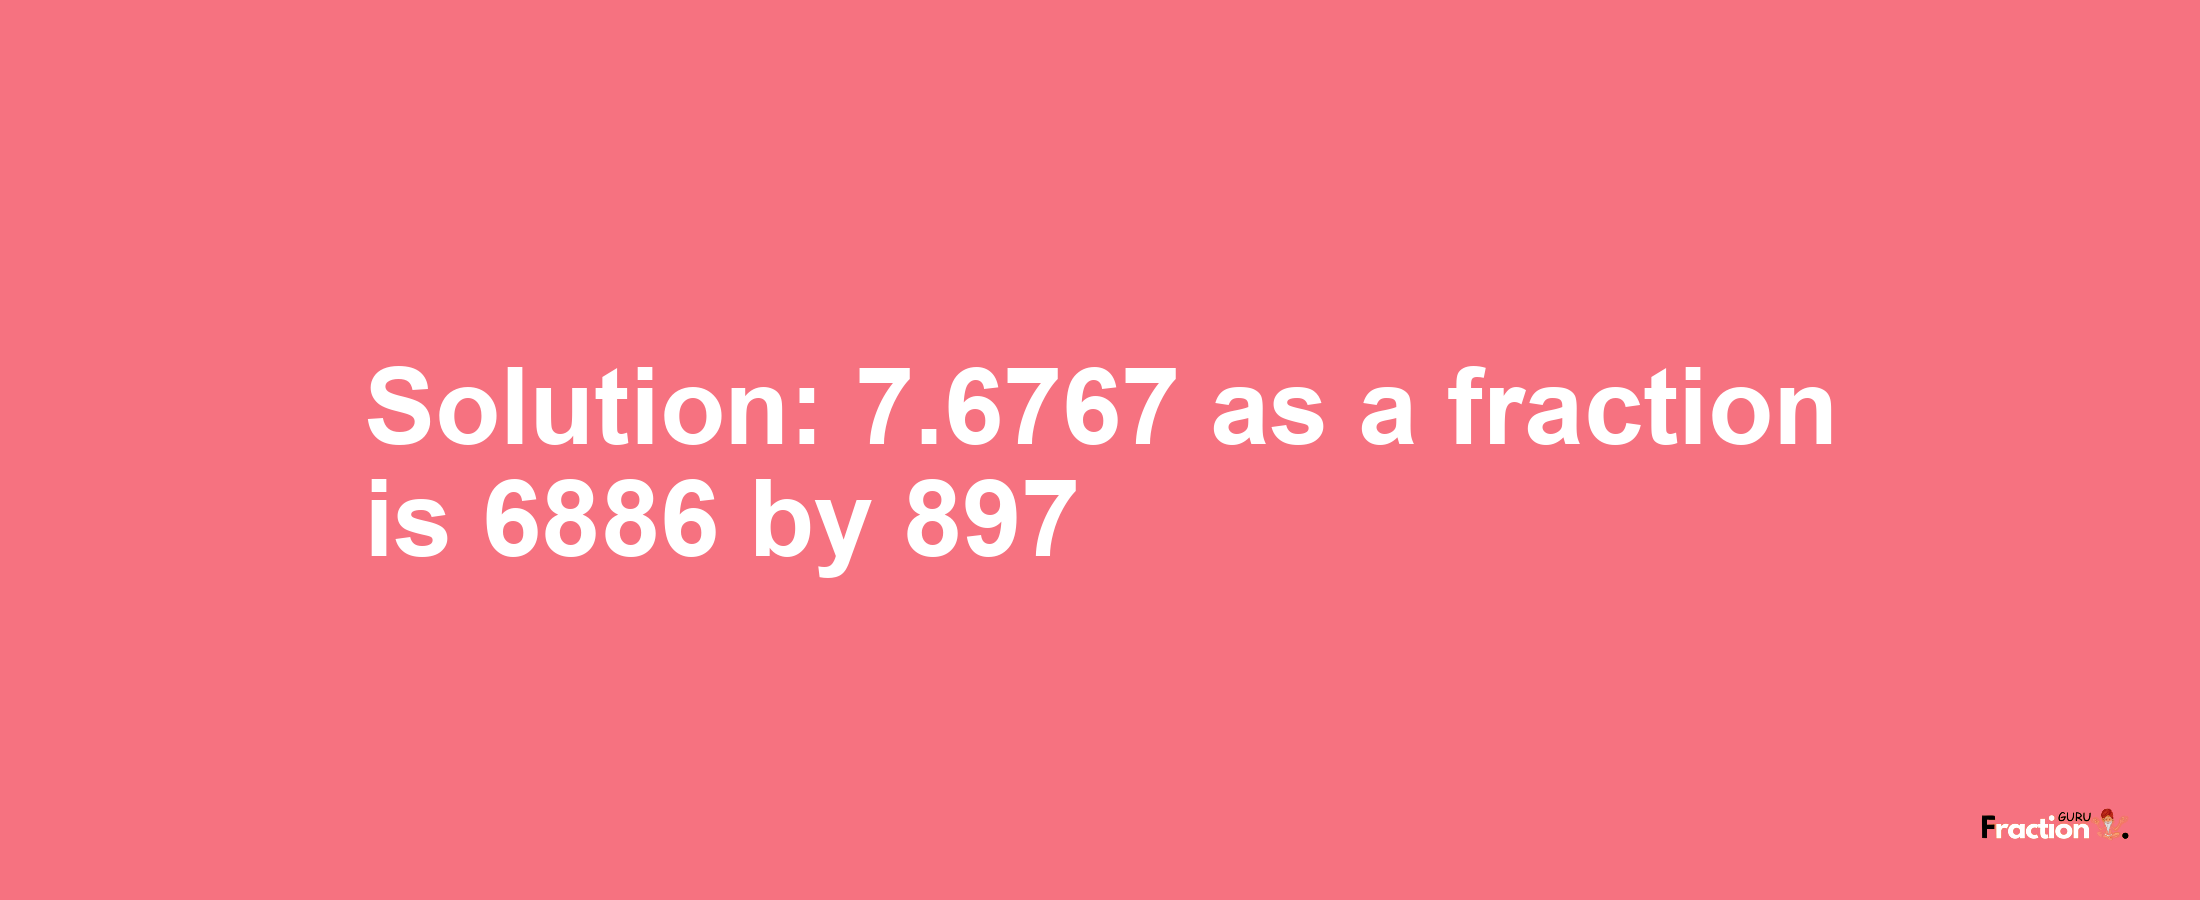 Solution:7.6767 as a fraction is 6886/897